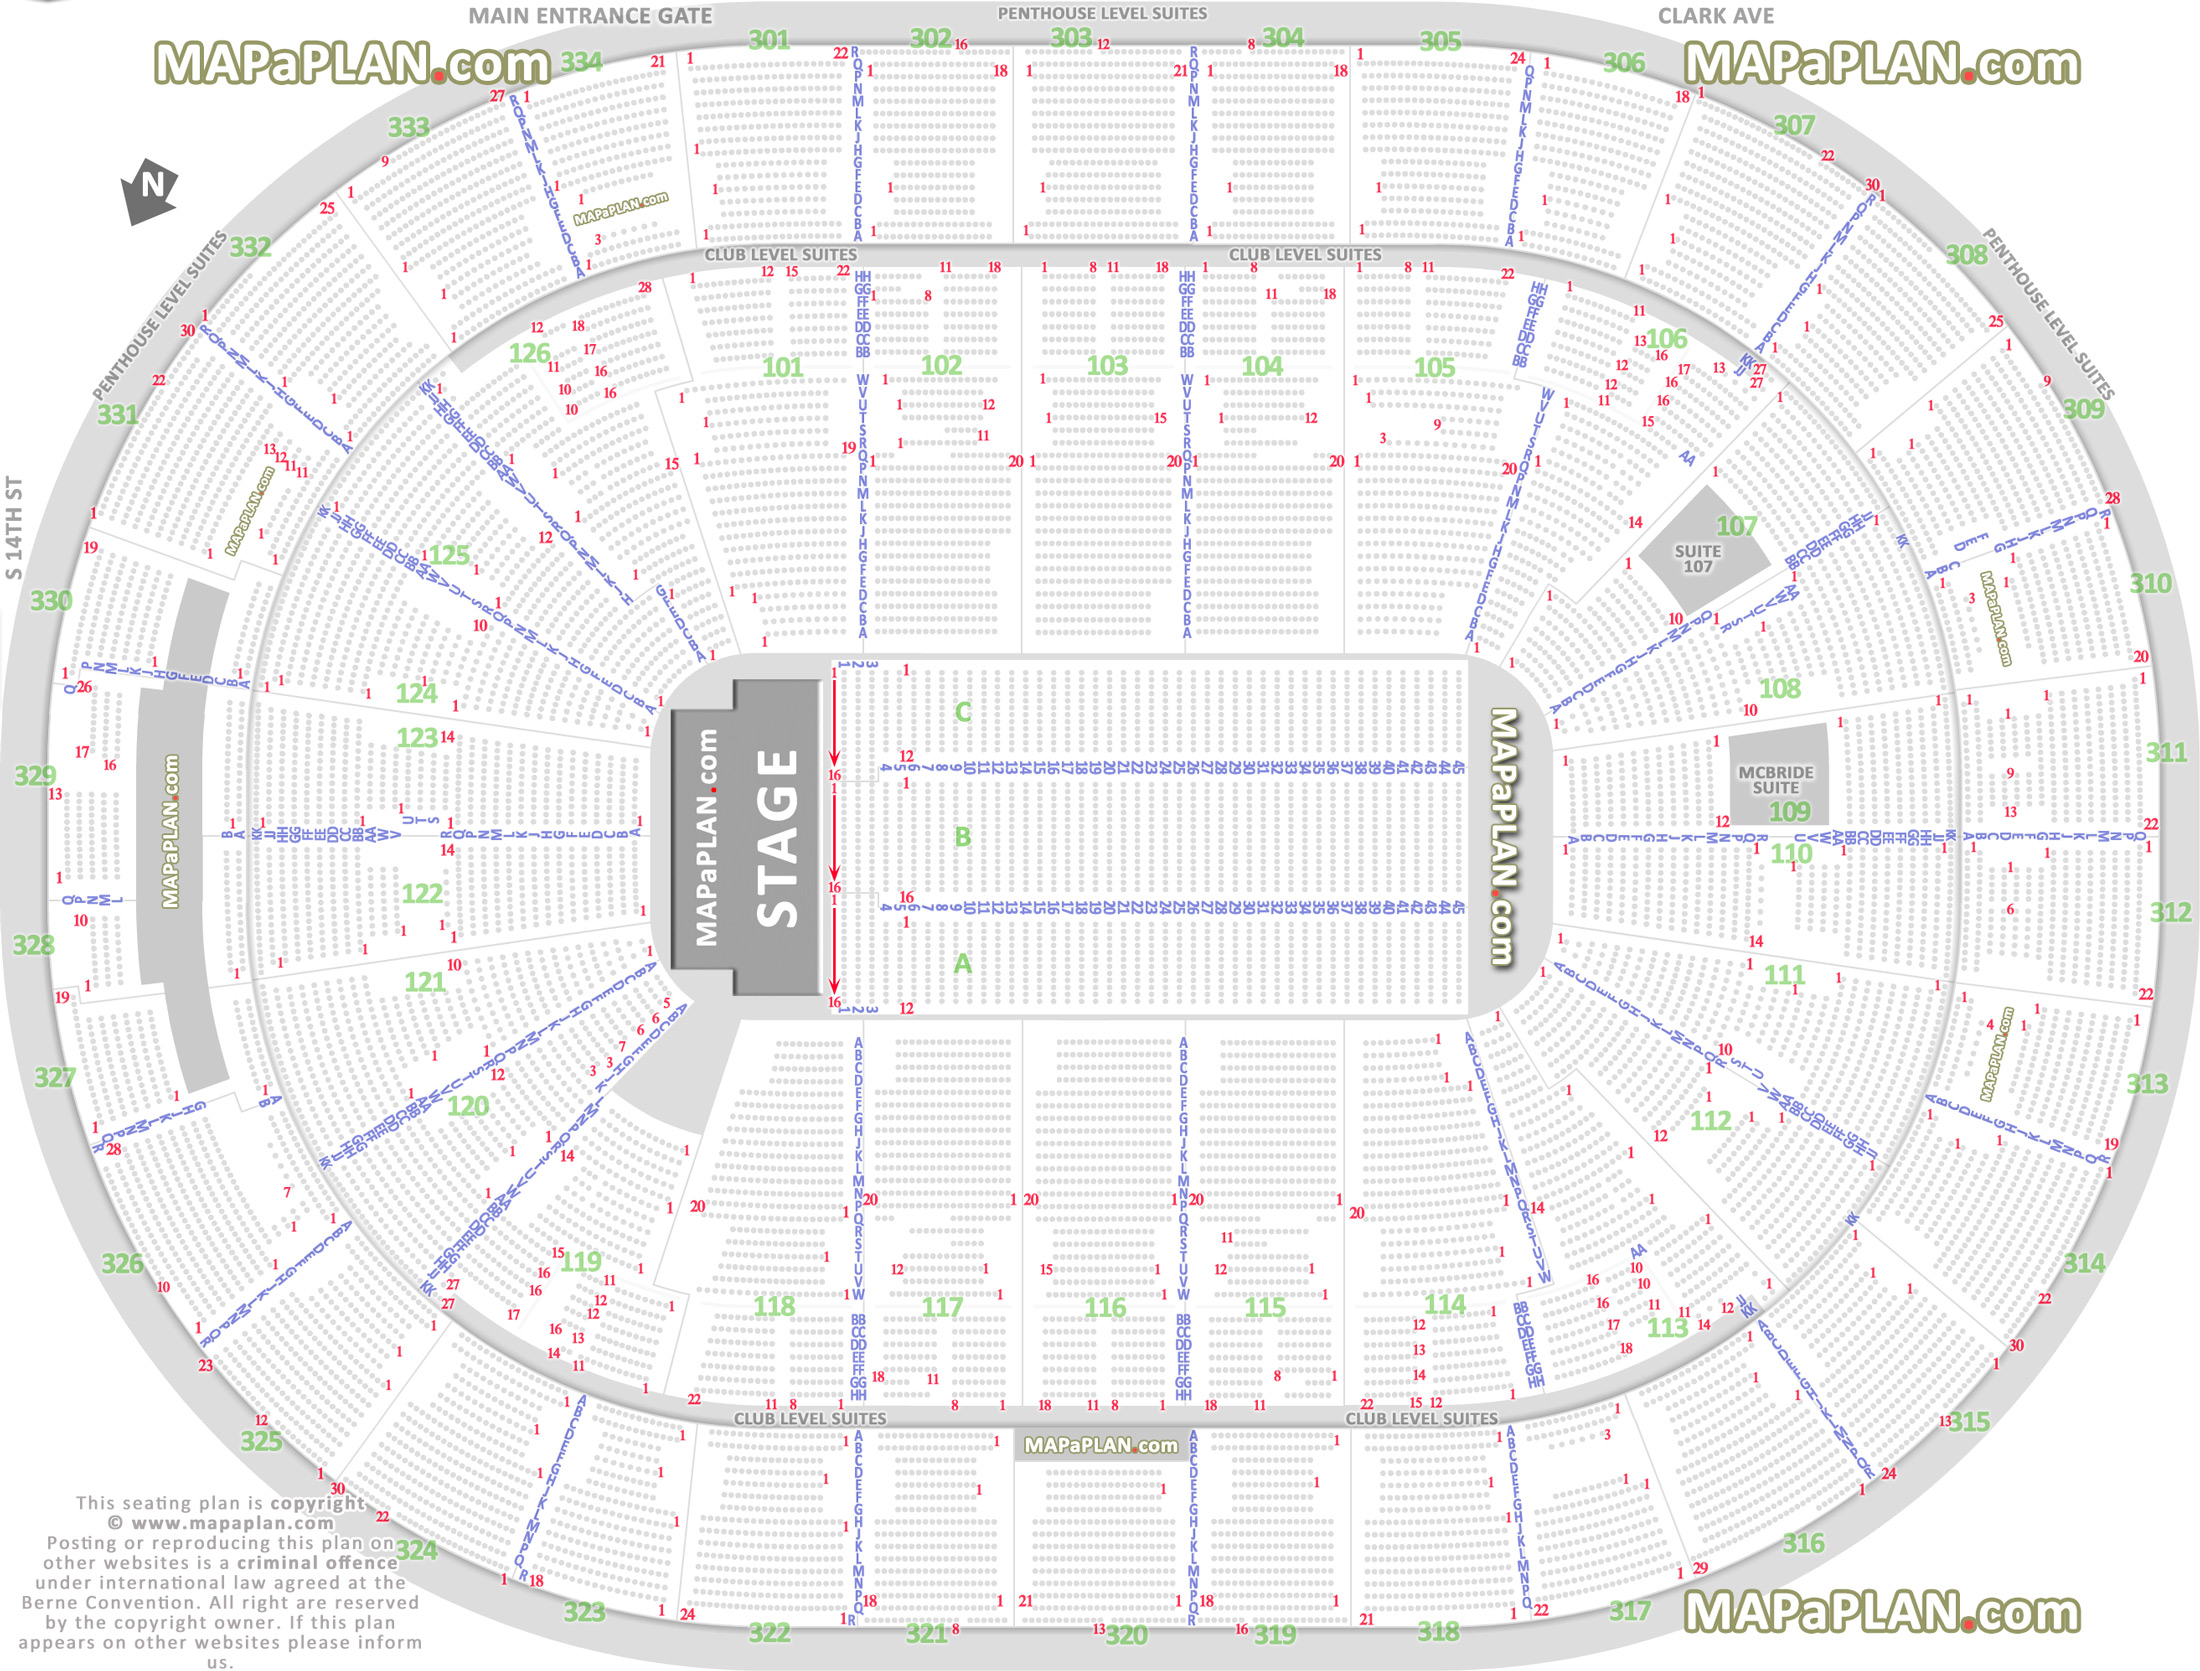 detailed seat row numbers end stage concert sections floor plan map arena plaza club mezzanine level layout St. Louis Enterprise Center seating chart